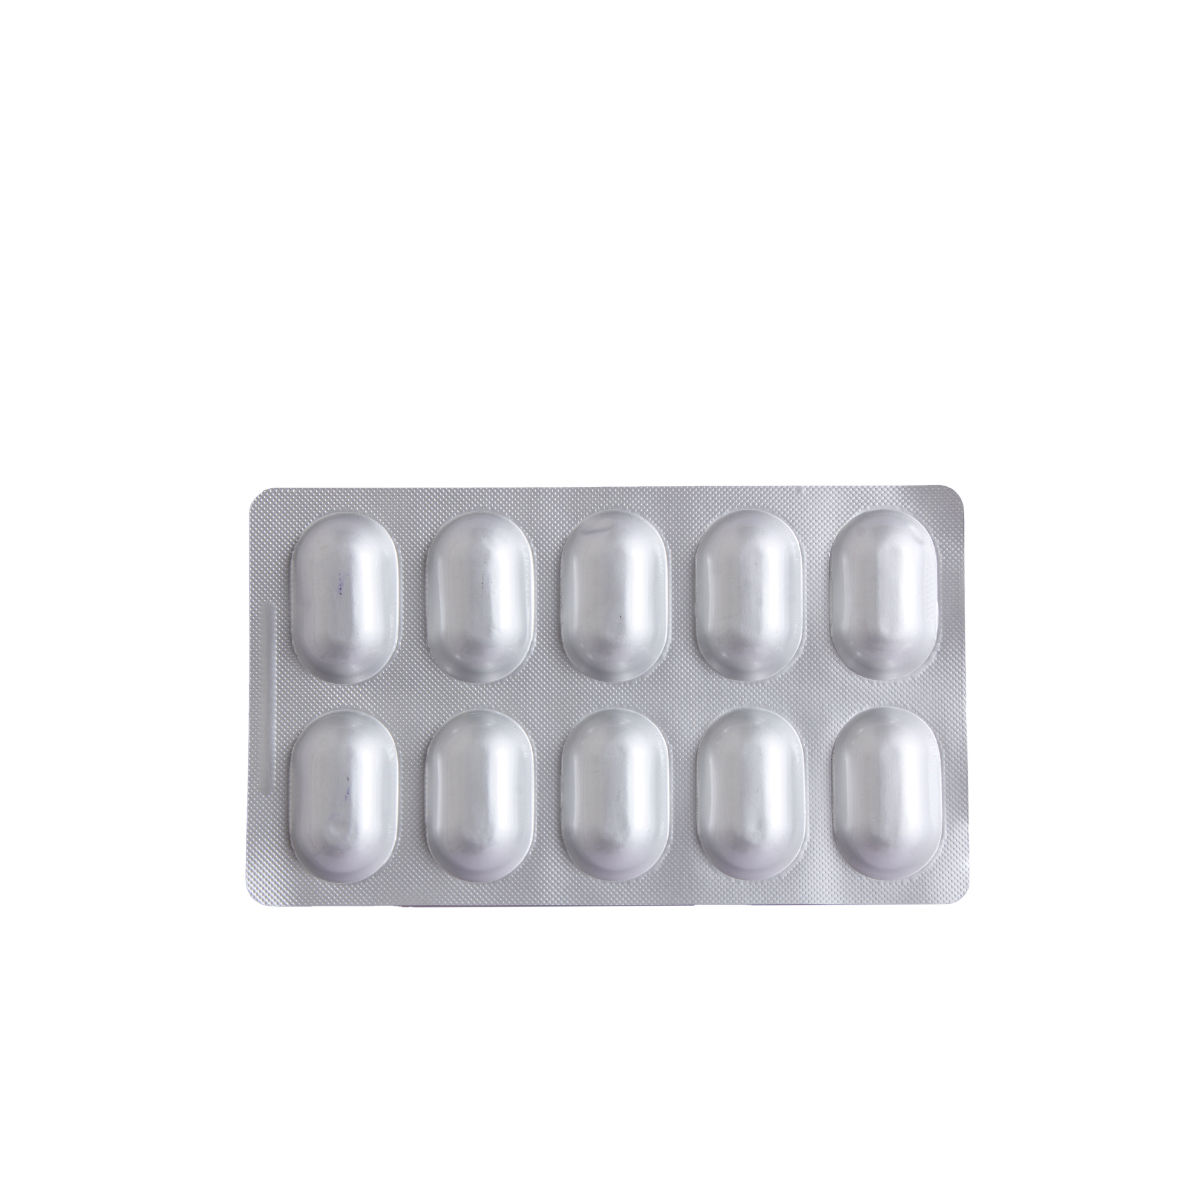 Enzelo 25000 Capsule 10'S, Pack of 10 CAPSULES